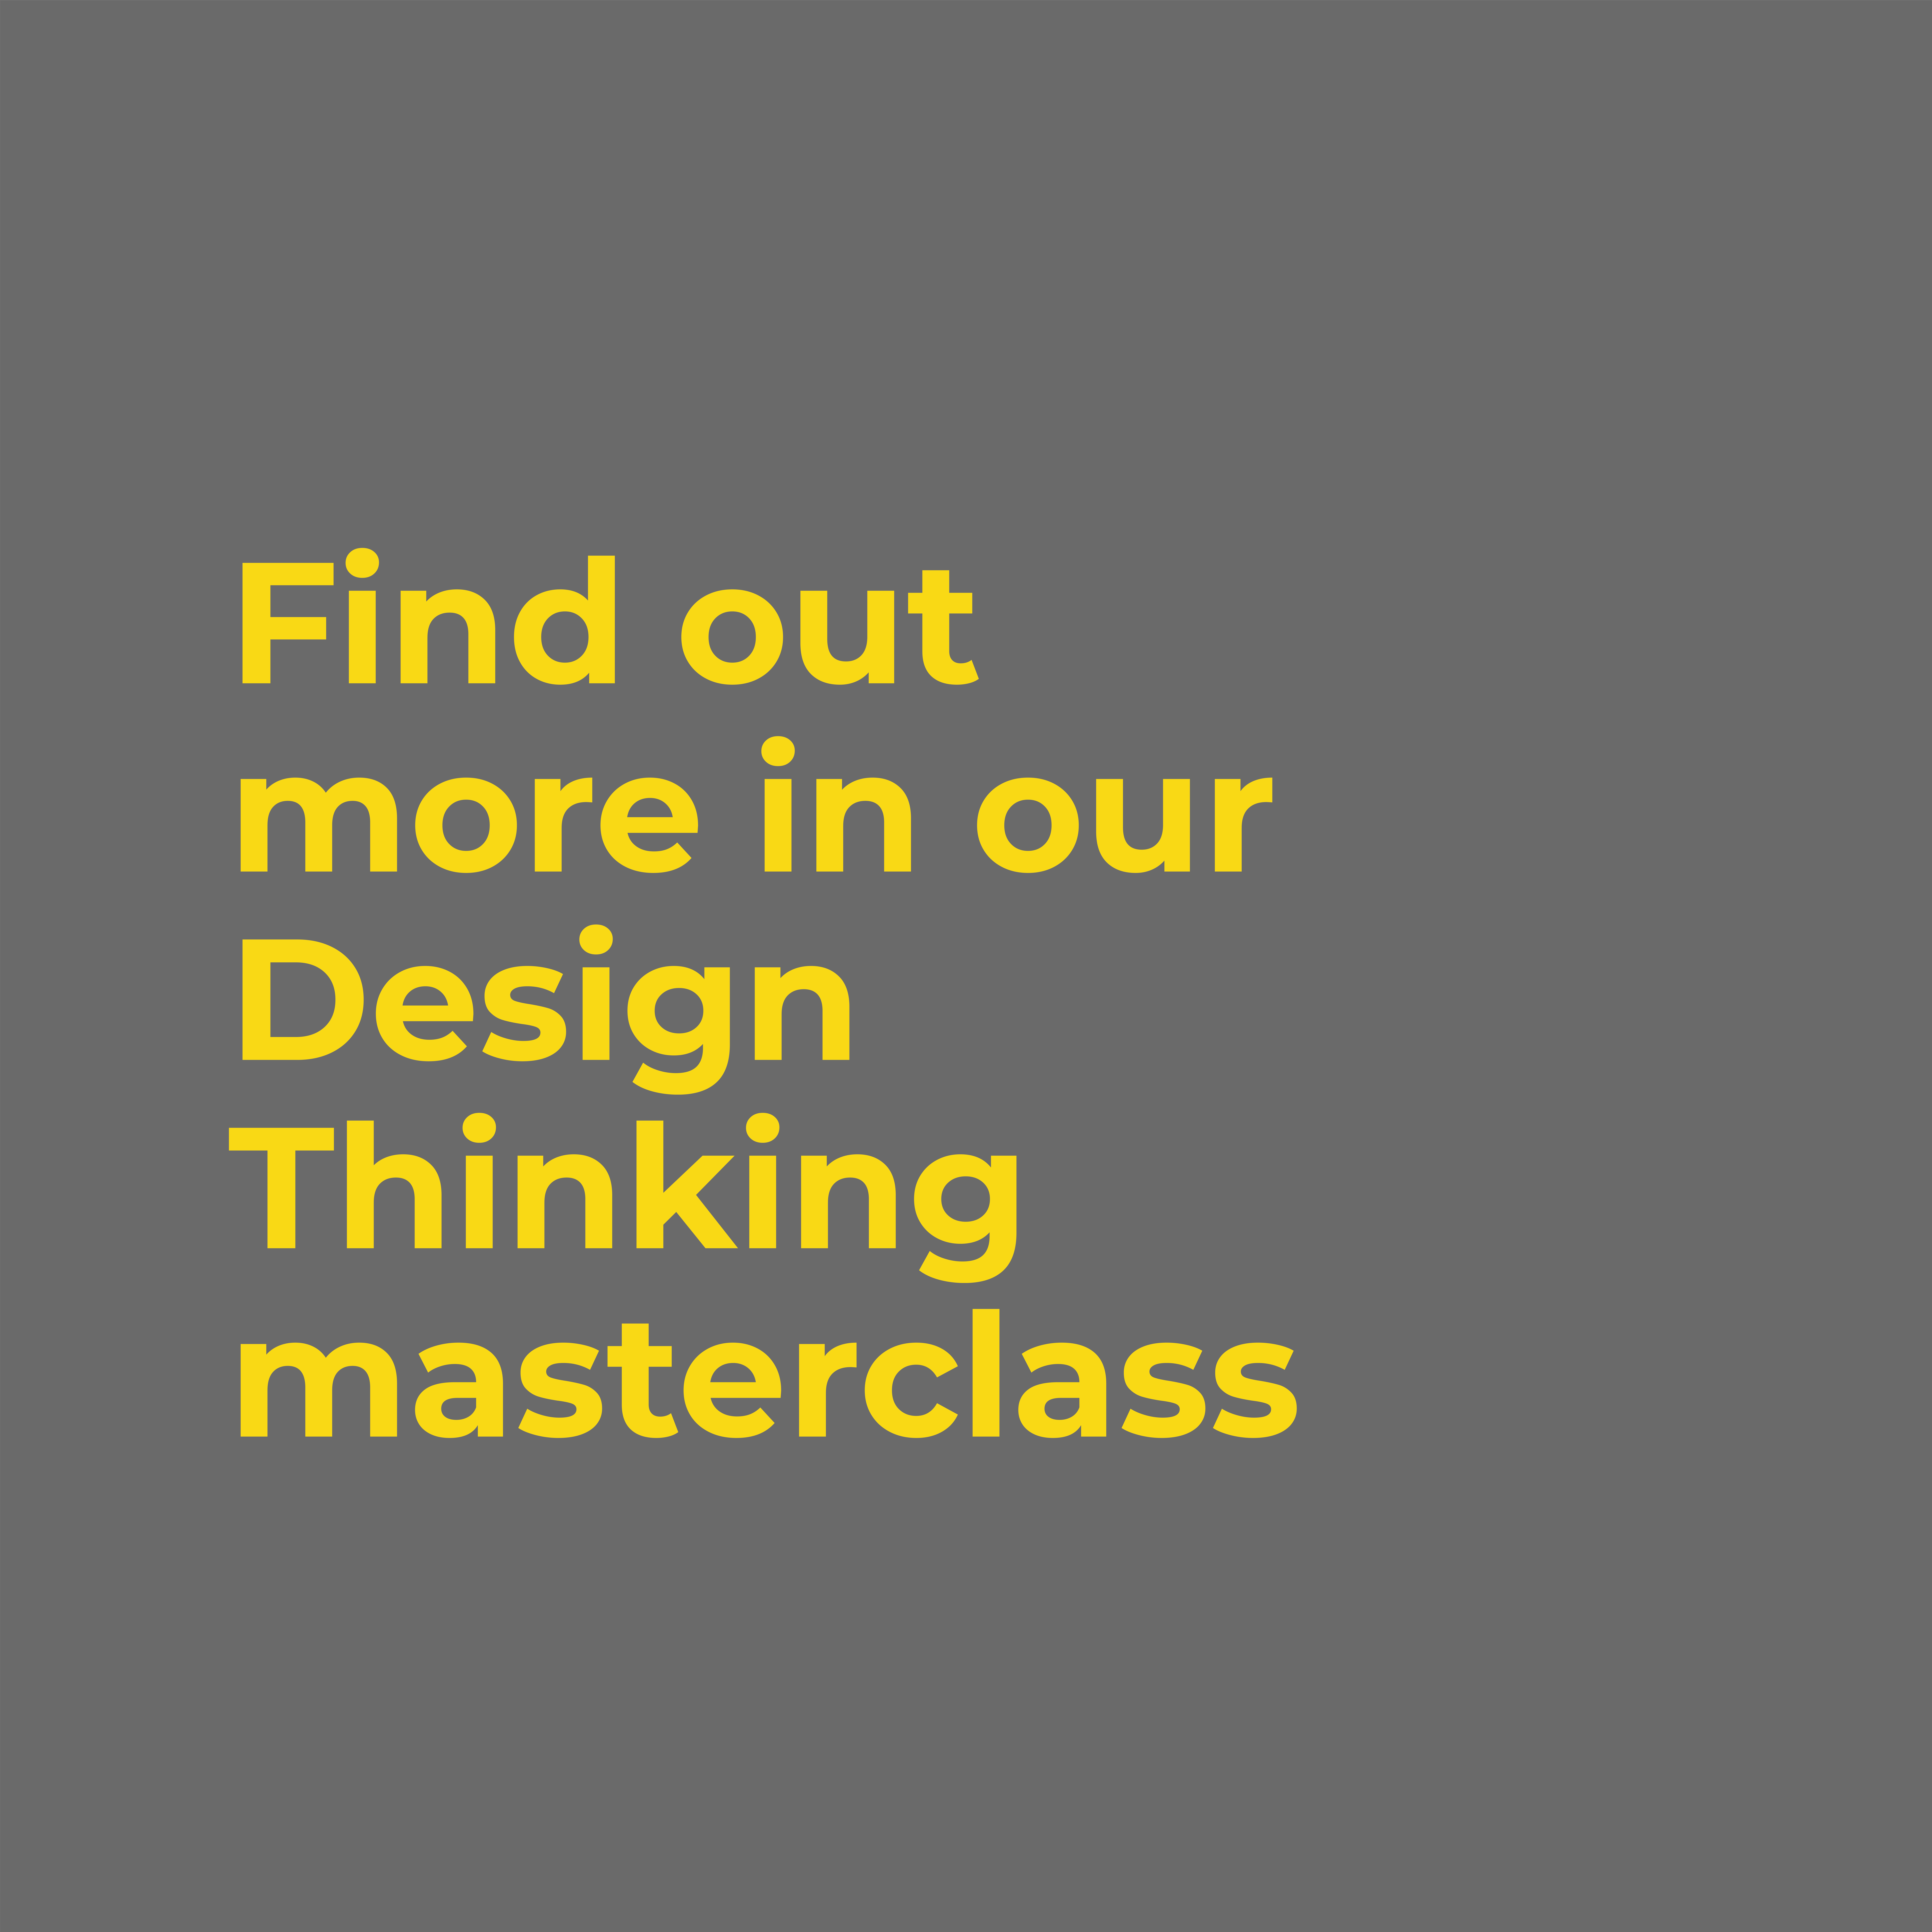 Find out more in our Design Thinking Masterclass